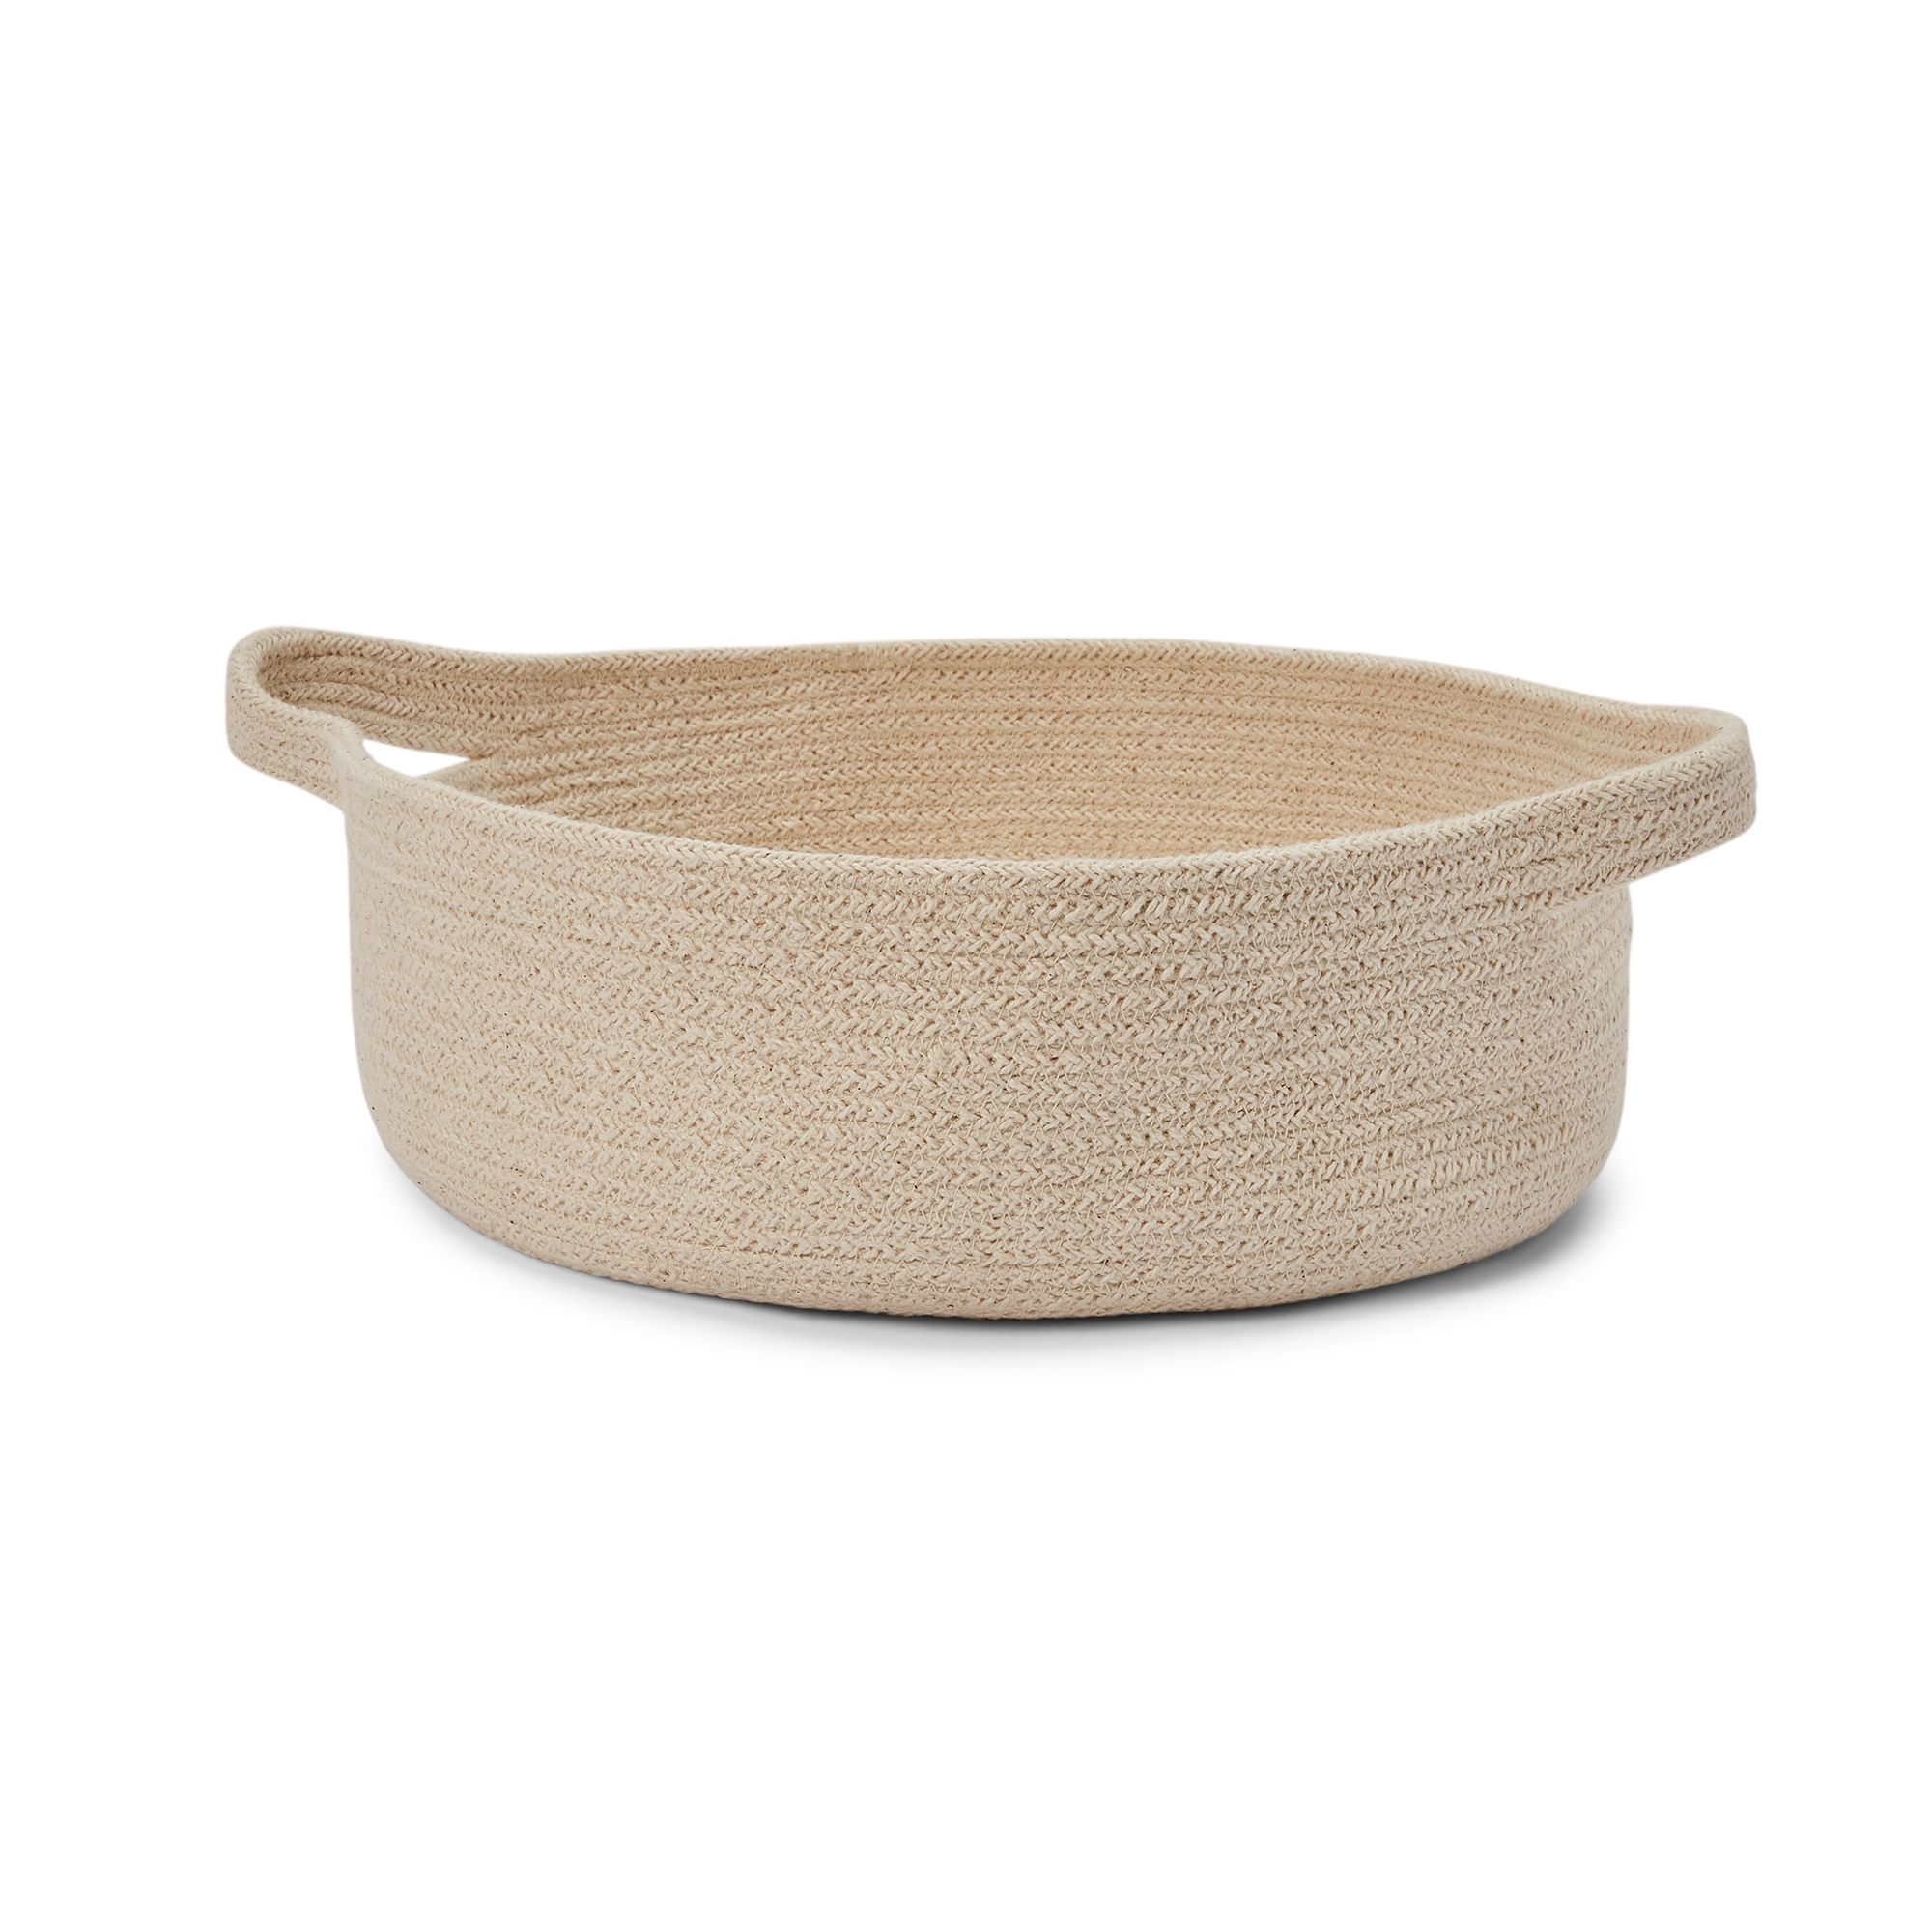 Side view, small size fern organic cotton basket with handles, in natural cotton color.